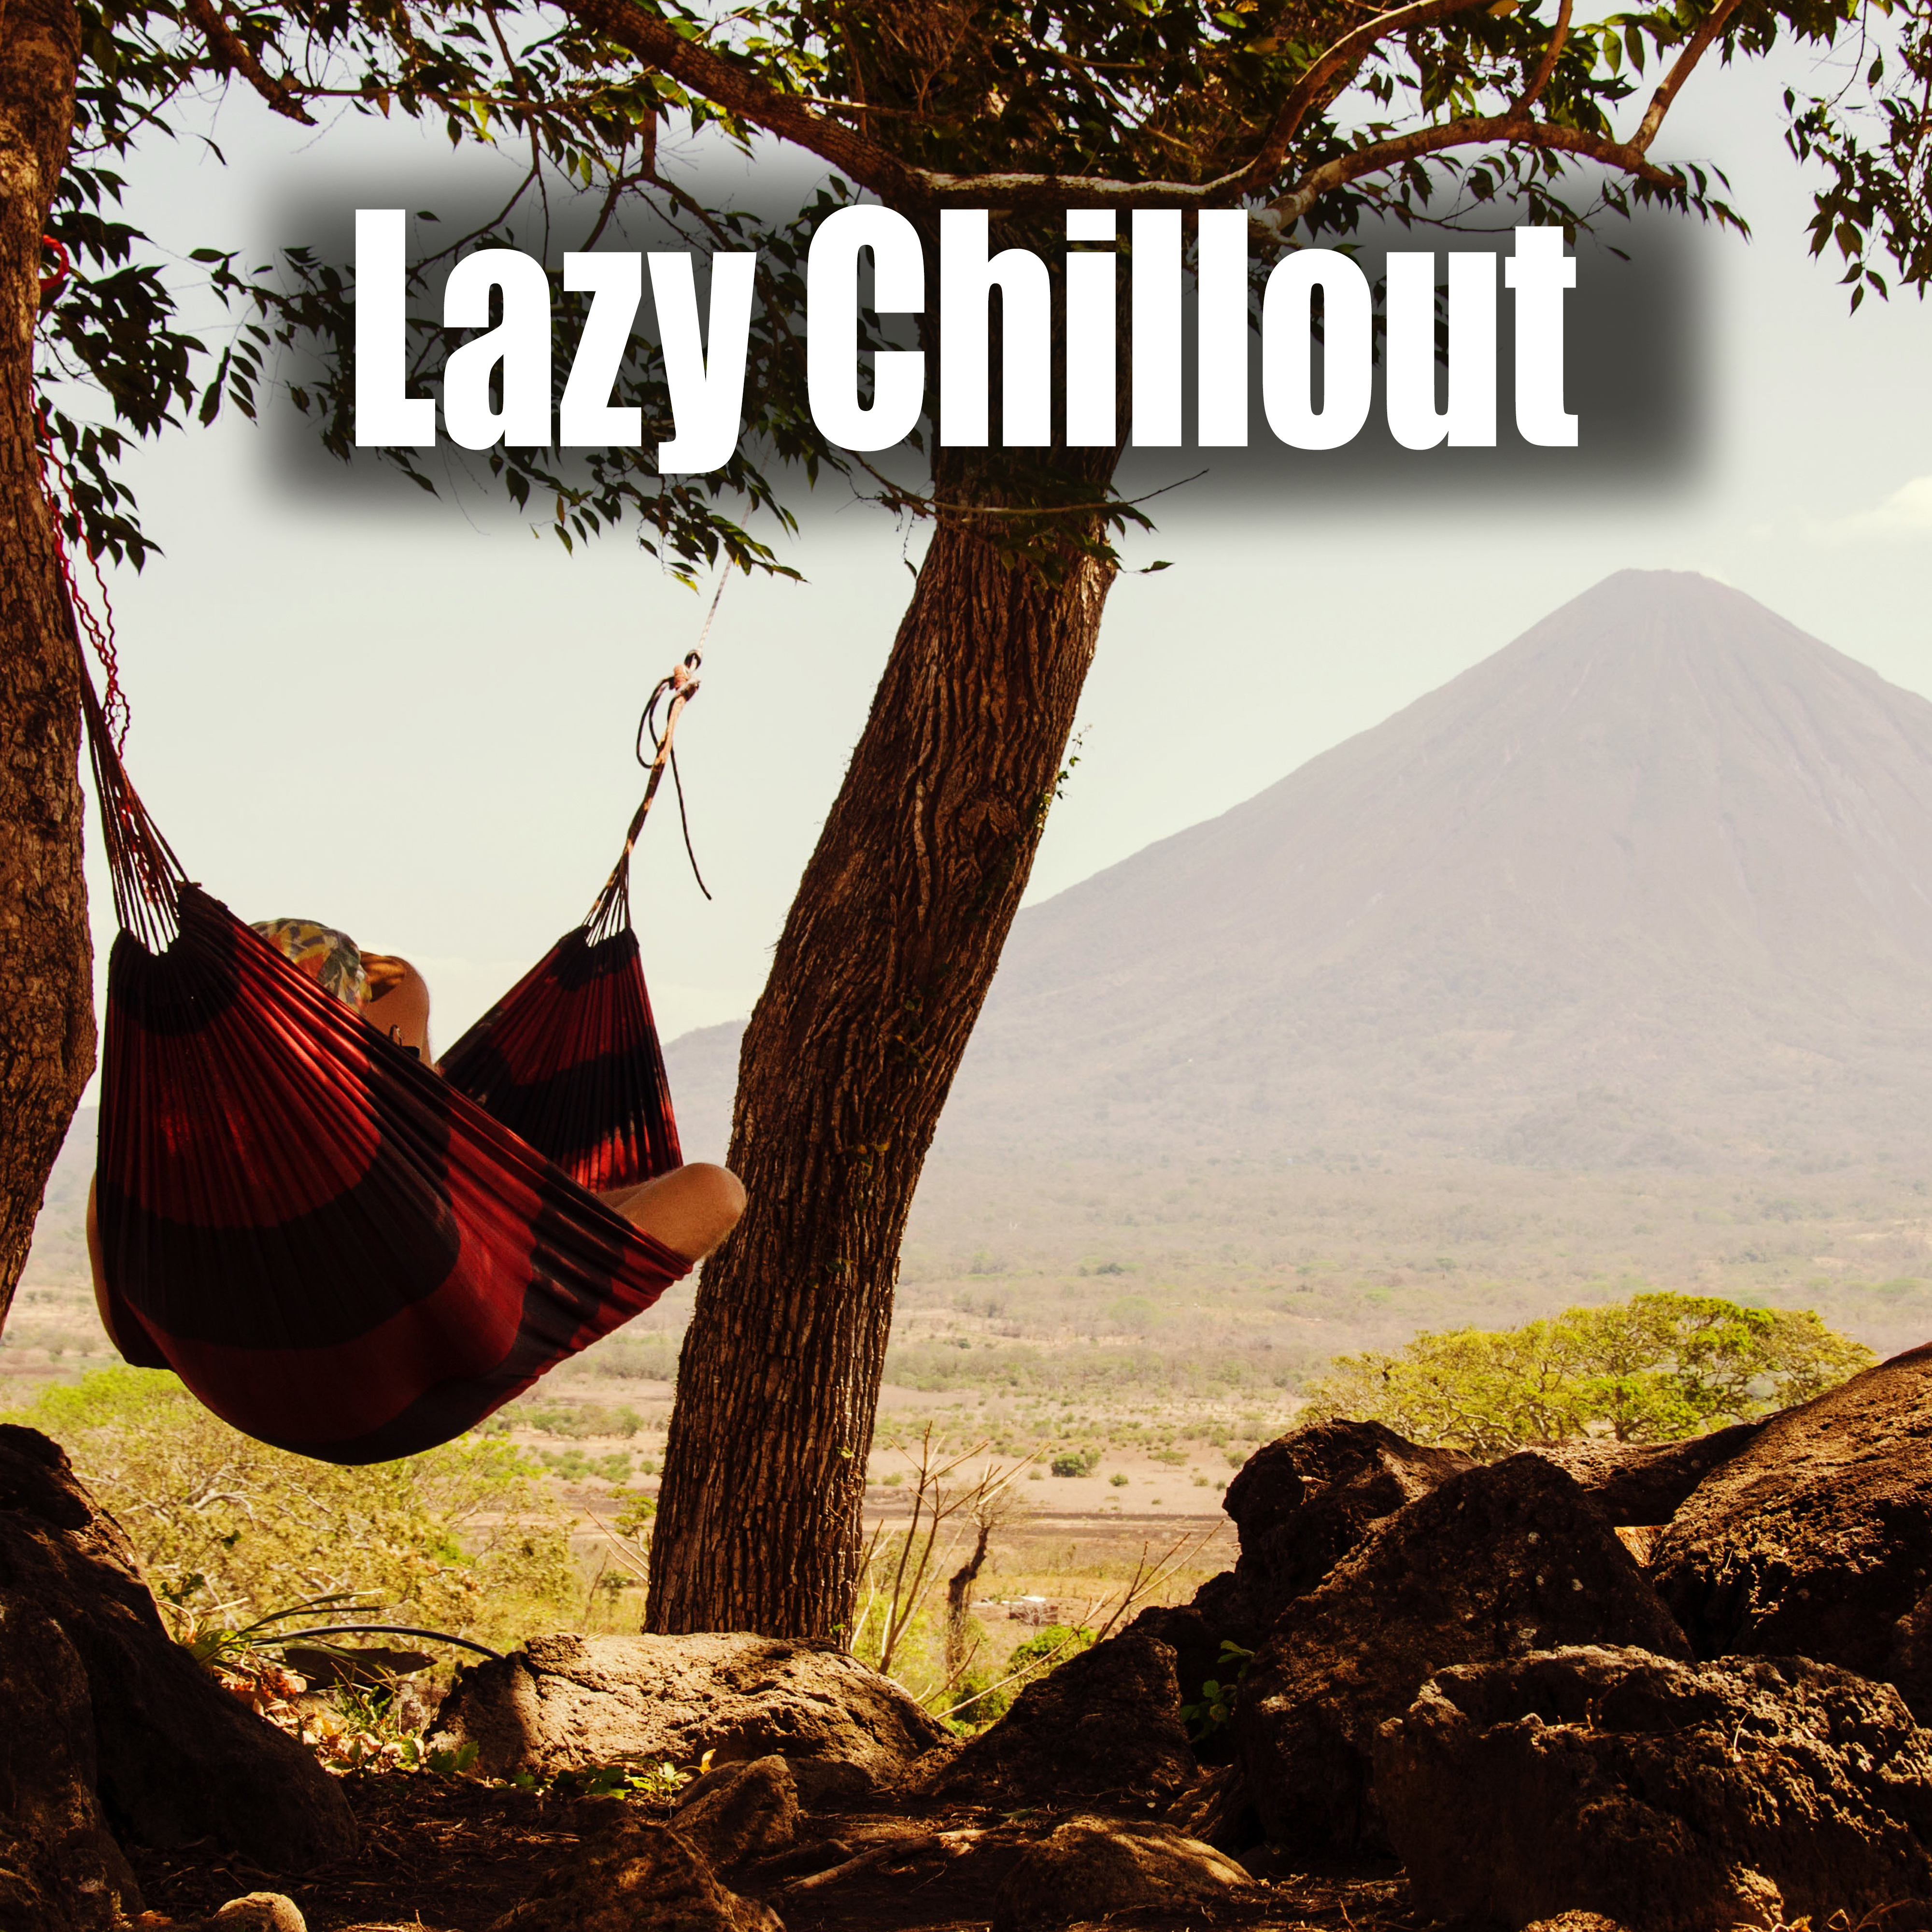 Lazy Chillout – Deep Chill Out, Relax Time, Rest, Positive Mood, Chill Out Day